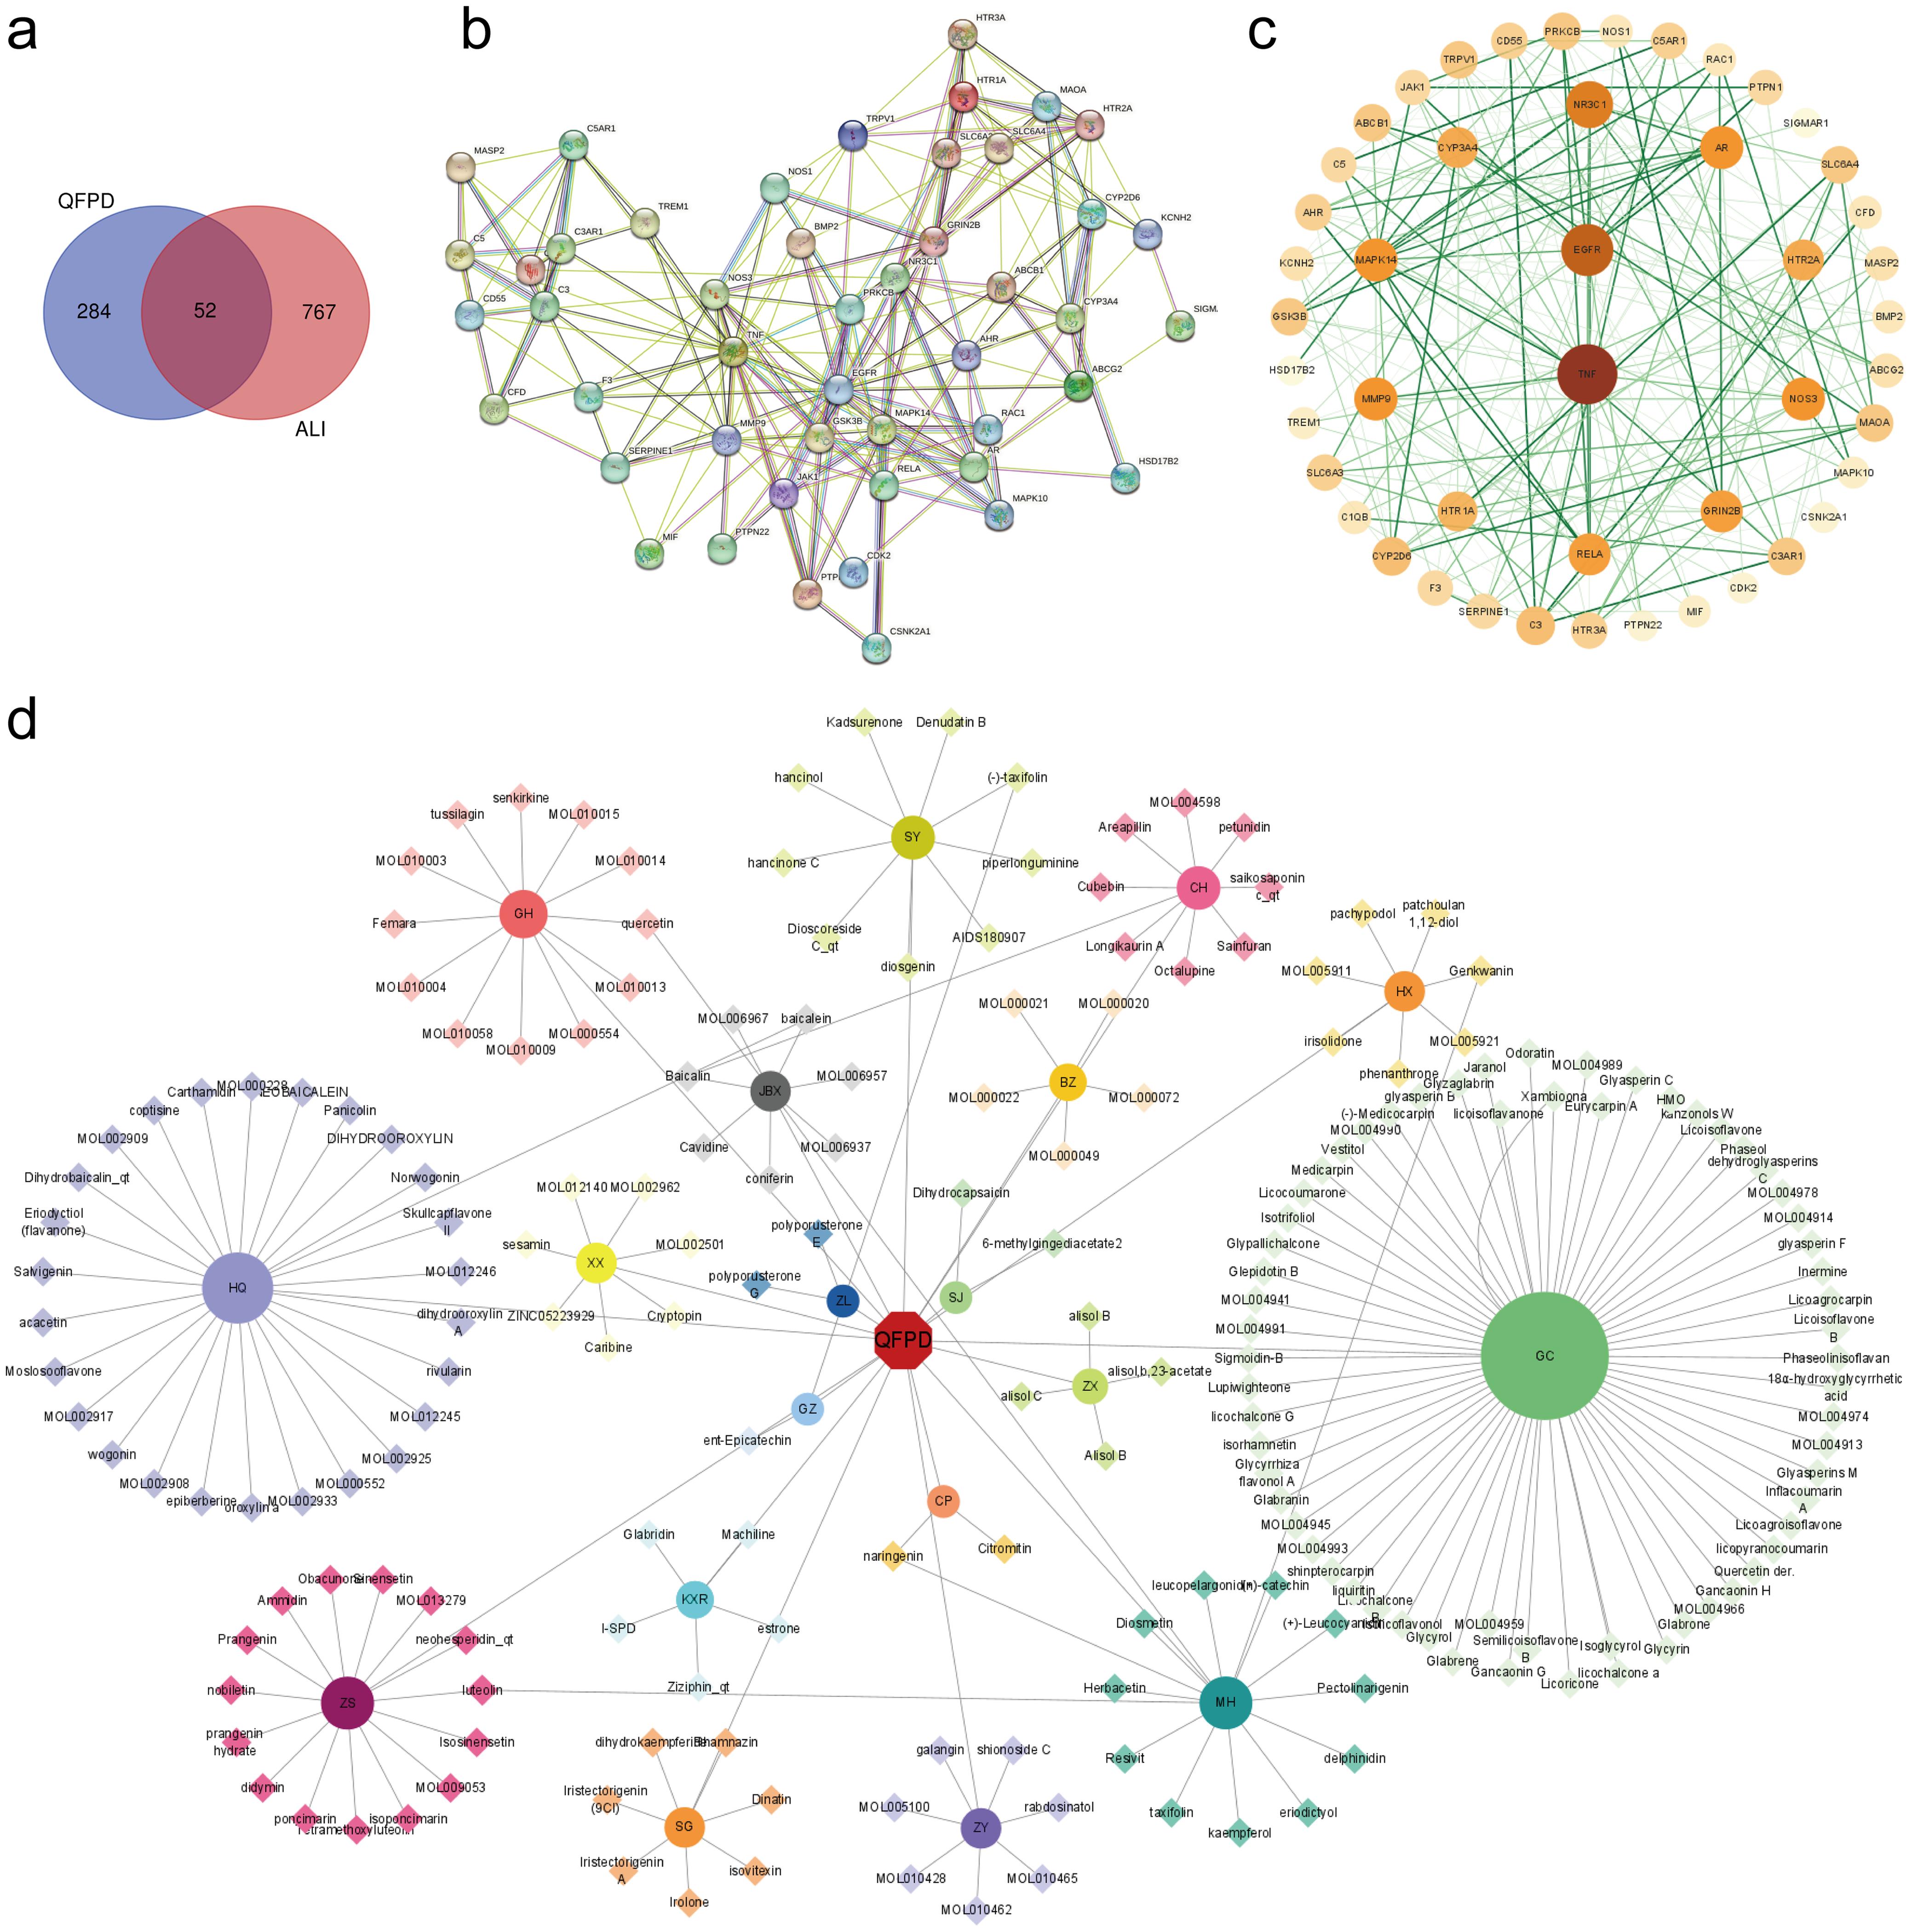 Network pharmacology analysis for the targets of the QFPD treatment in ALI.